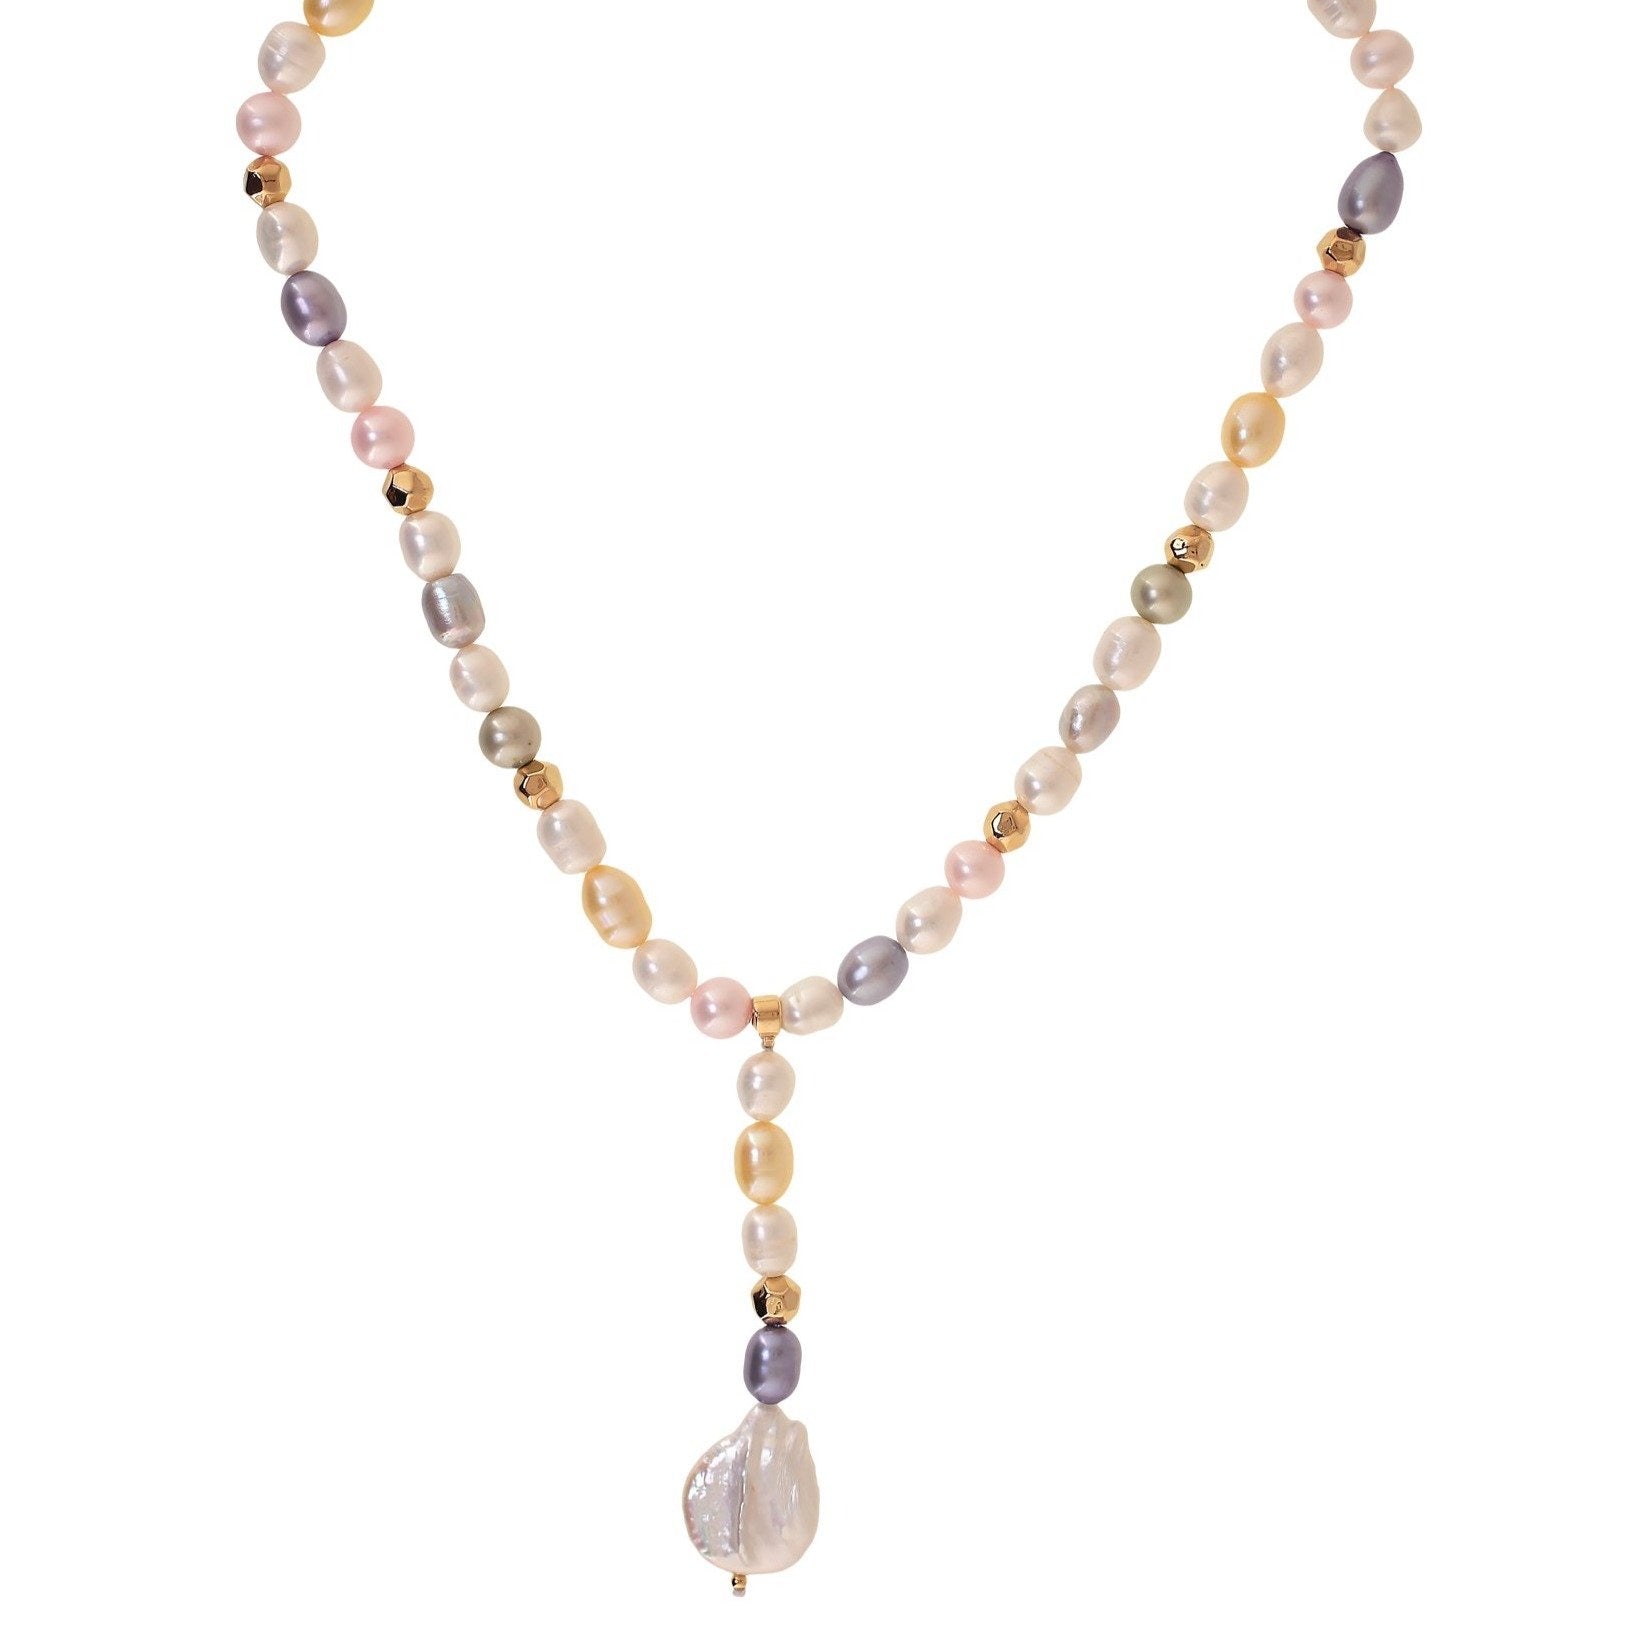 'PENINSULA' COLORED PEARLS TIE NECKLACE